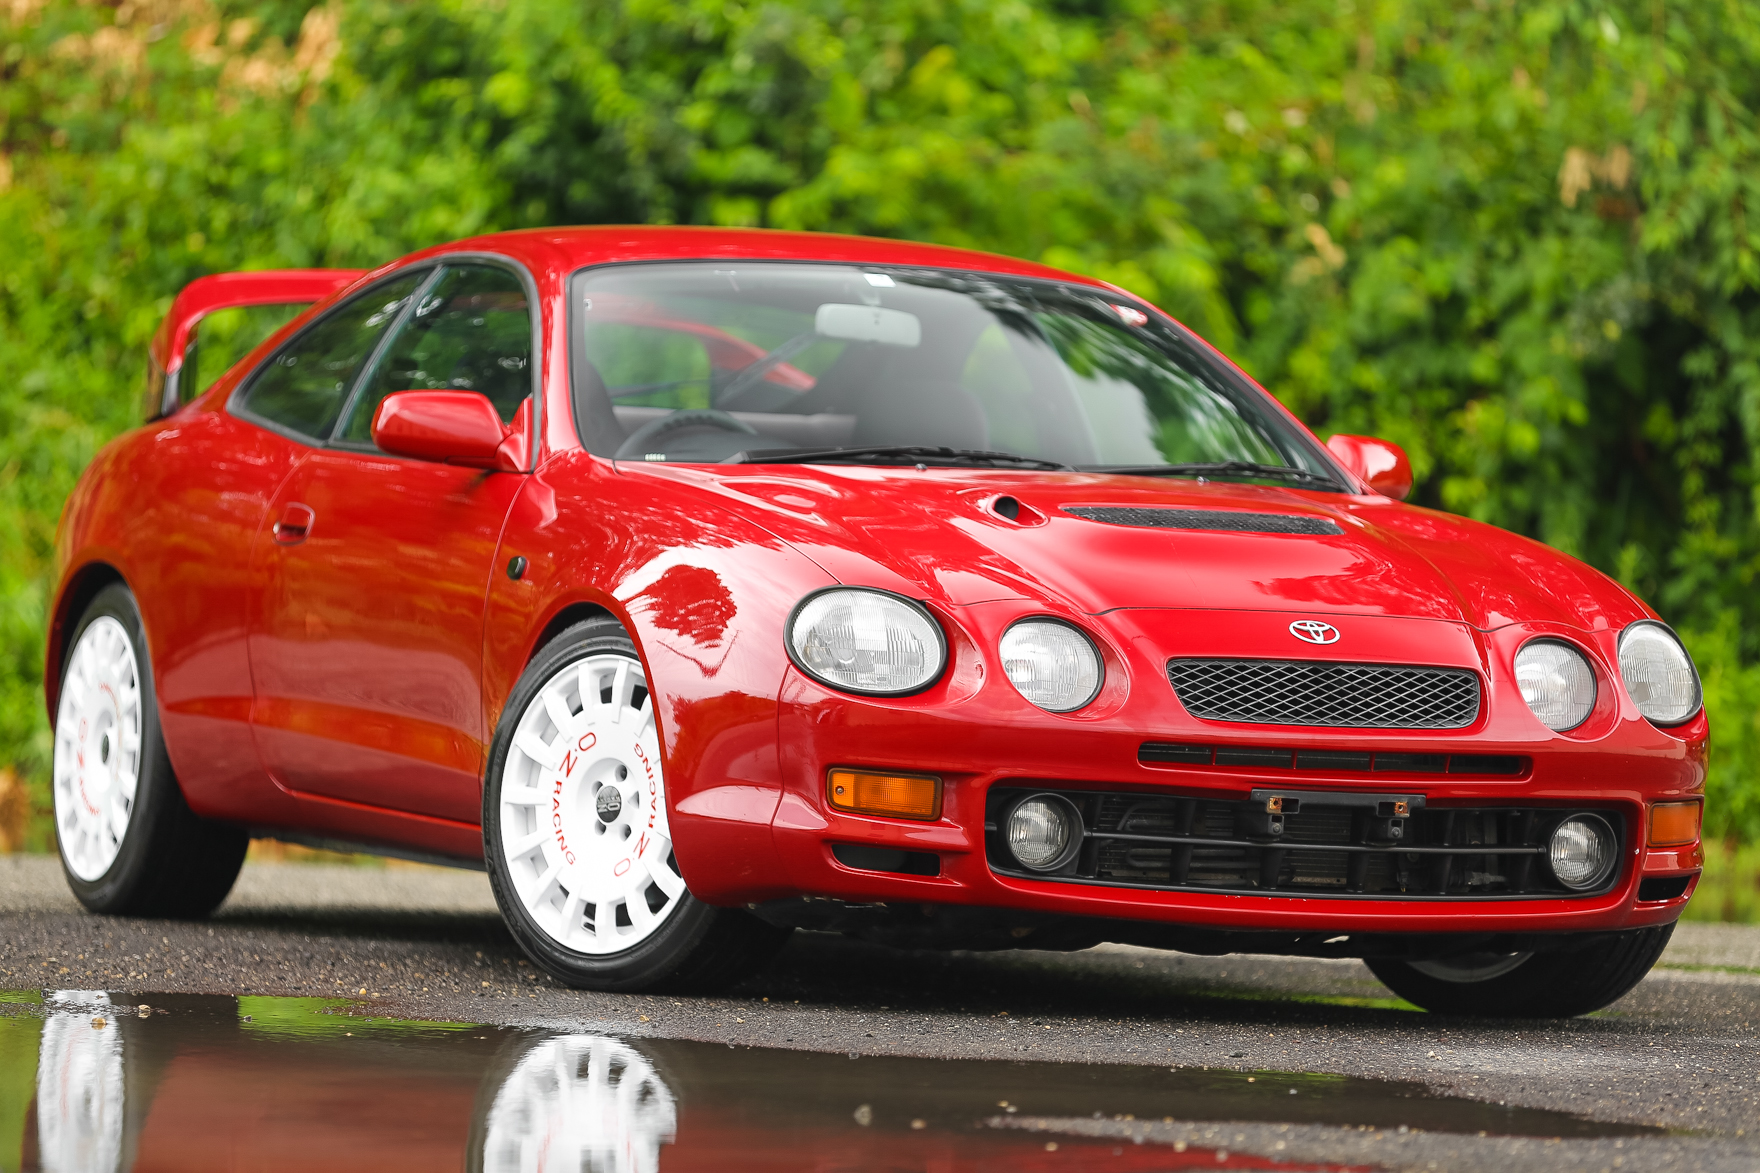 1995 Toyota Celica GT-Four - Available for $24,995